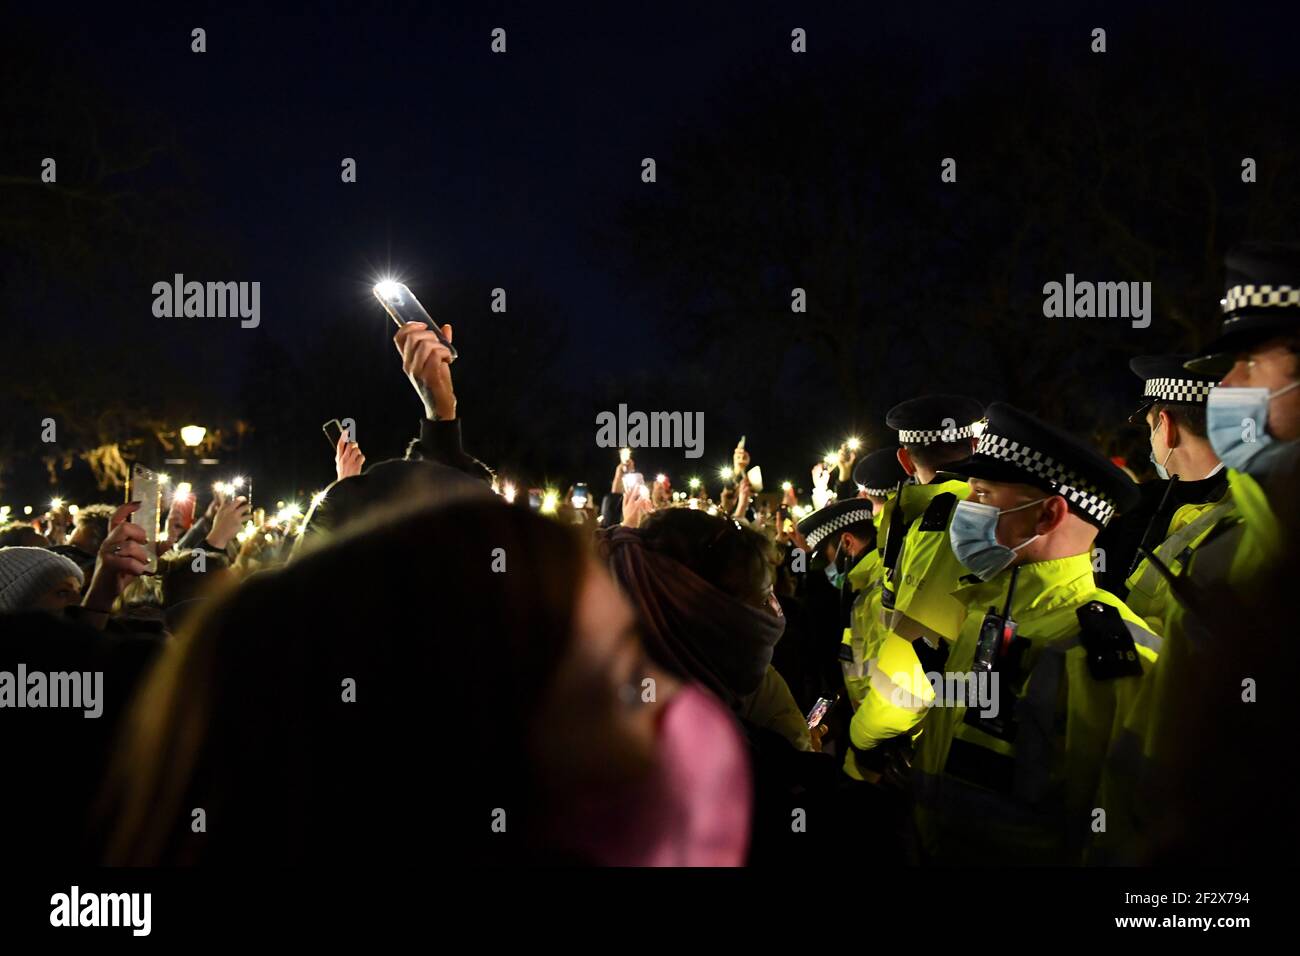 Mourners stand opposite police members as people gather at a memorial site at the Clapham Common Bandstand, following the kidnap and murder of Sarah Everard, in London, Britain, March 13, 2021. REUTERS/Dylan Martinez Stock Photo